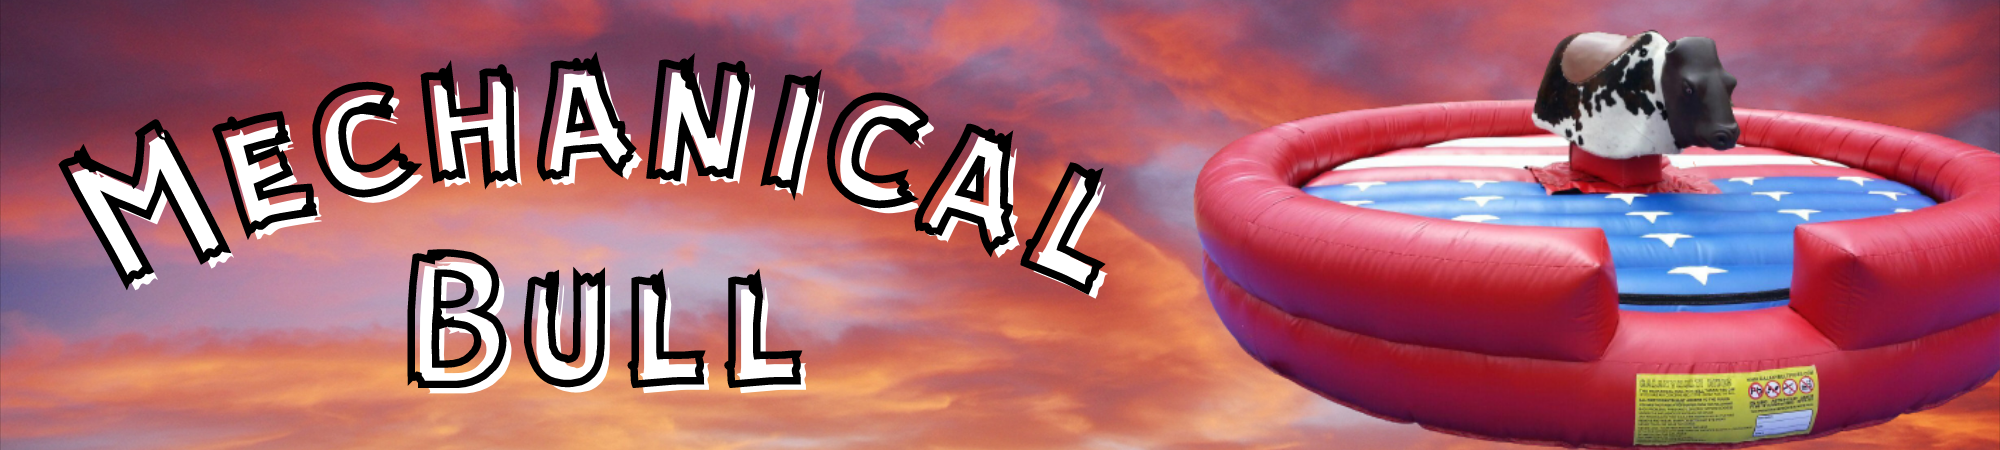 Promotional banner featuring a red and blue inflatable mechanical bull ride against a dramatic sky at sunset with the bold text 'MECHANICAL BULL' displayed prominently.